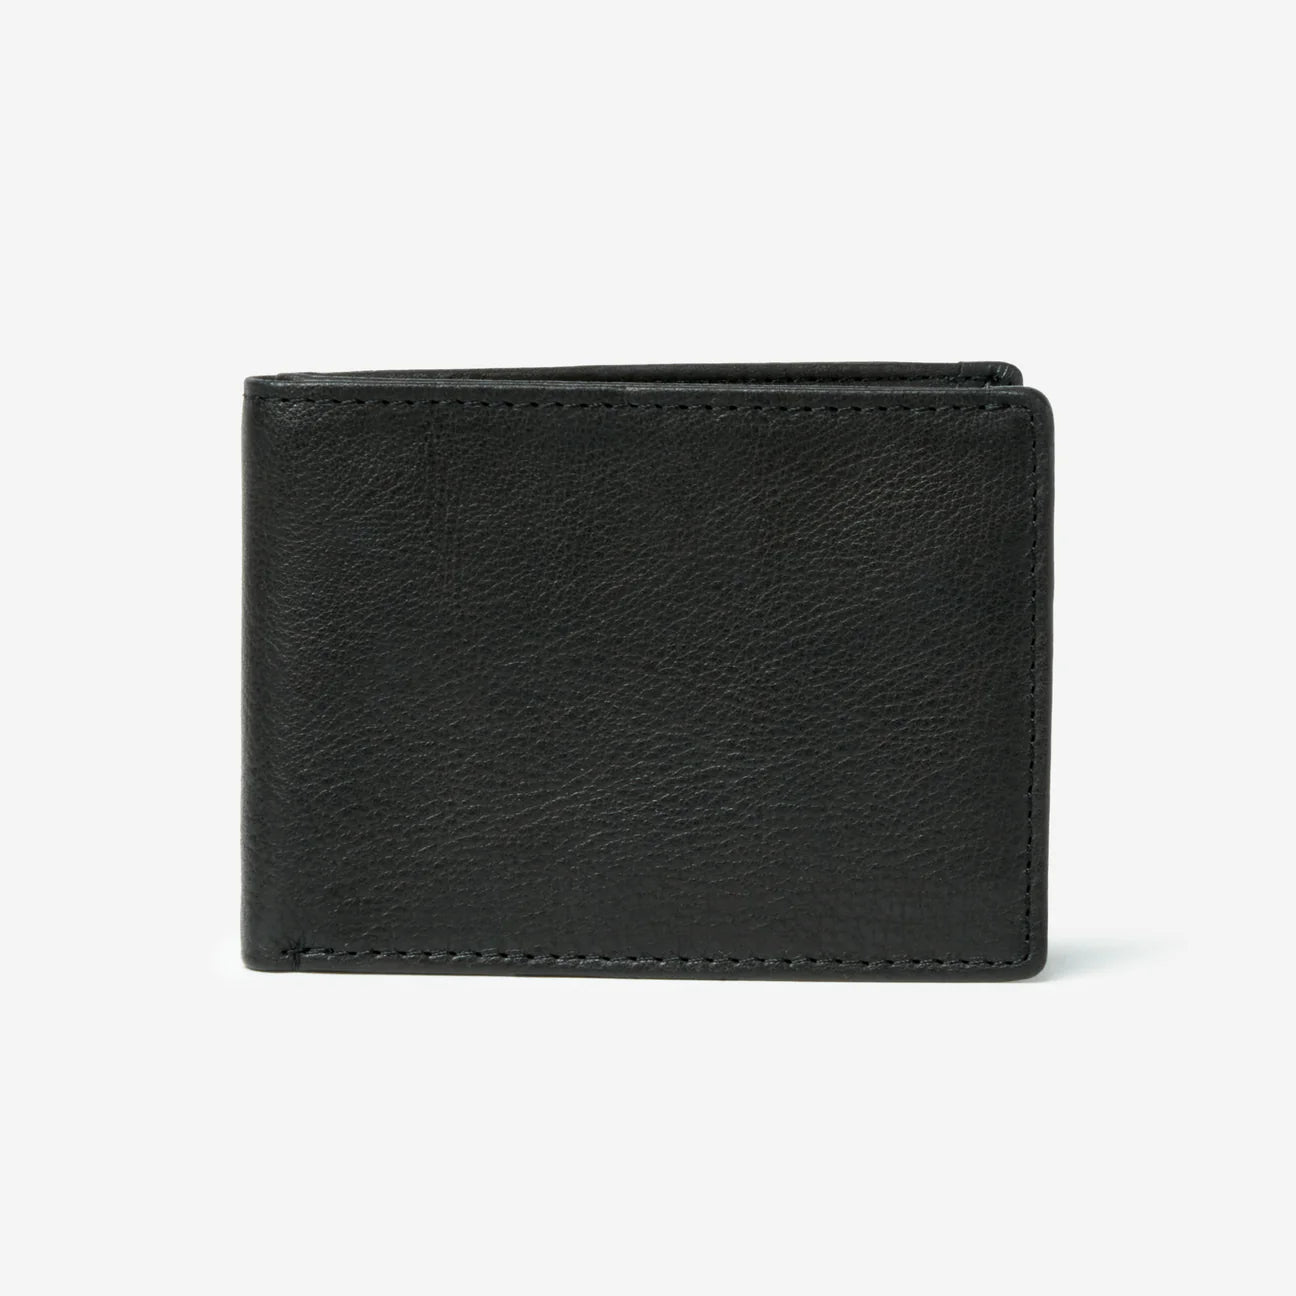 Osgoode Marley Leather RFID Ultra Mini Thinfold Wallet- 1224